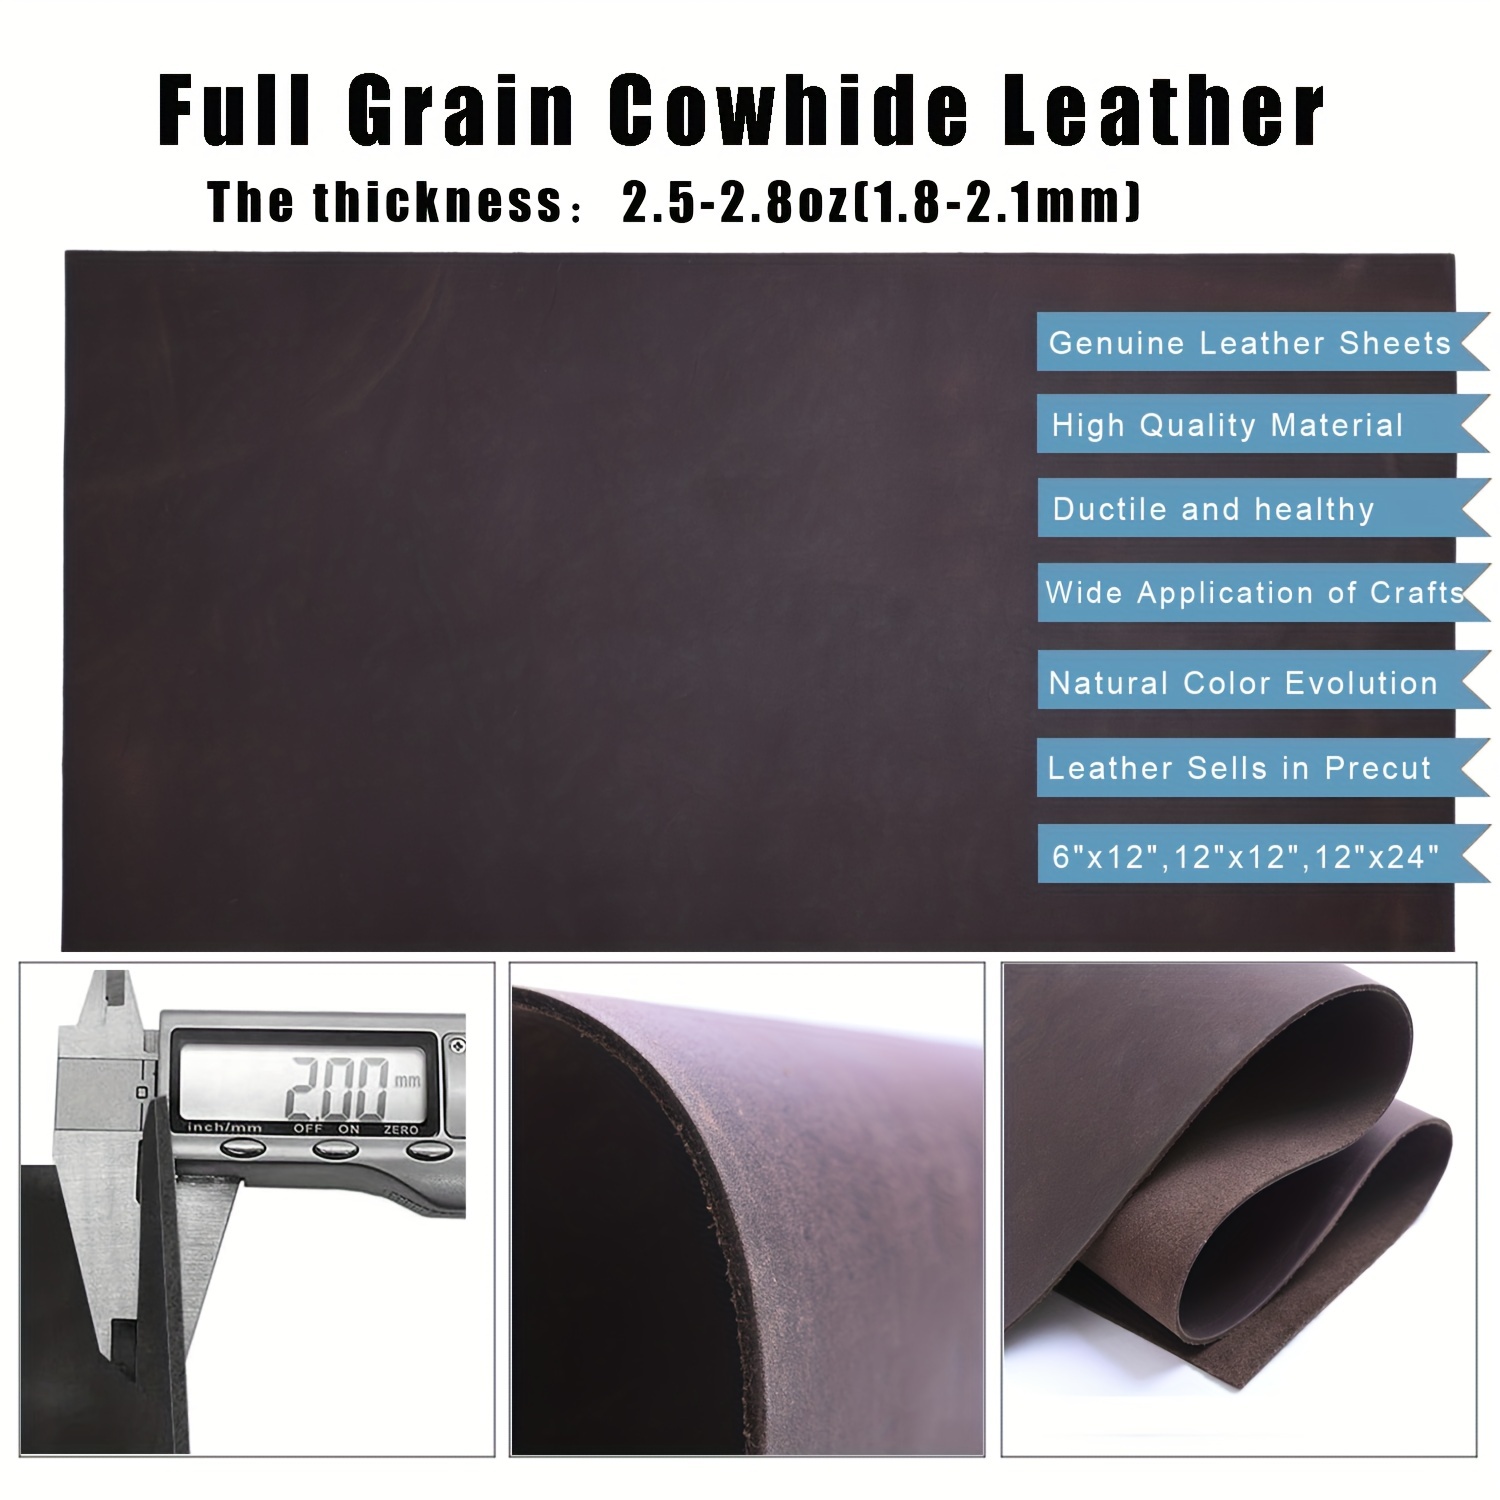 Black Leather Sheets for Crafts Tooling Leather Square 1.8-2.1mm Thick Full  Grain Leather Pieces Genuine Cowhide Leather for Crafts Sewing Hobby